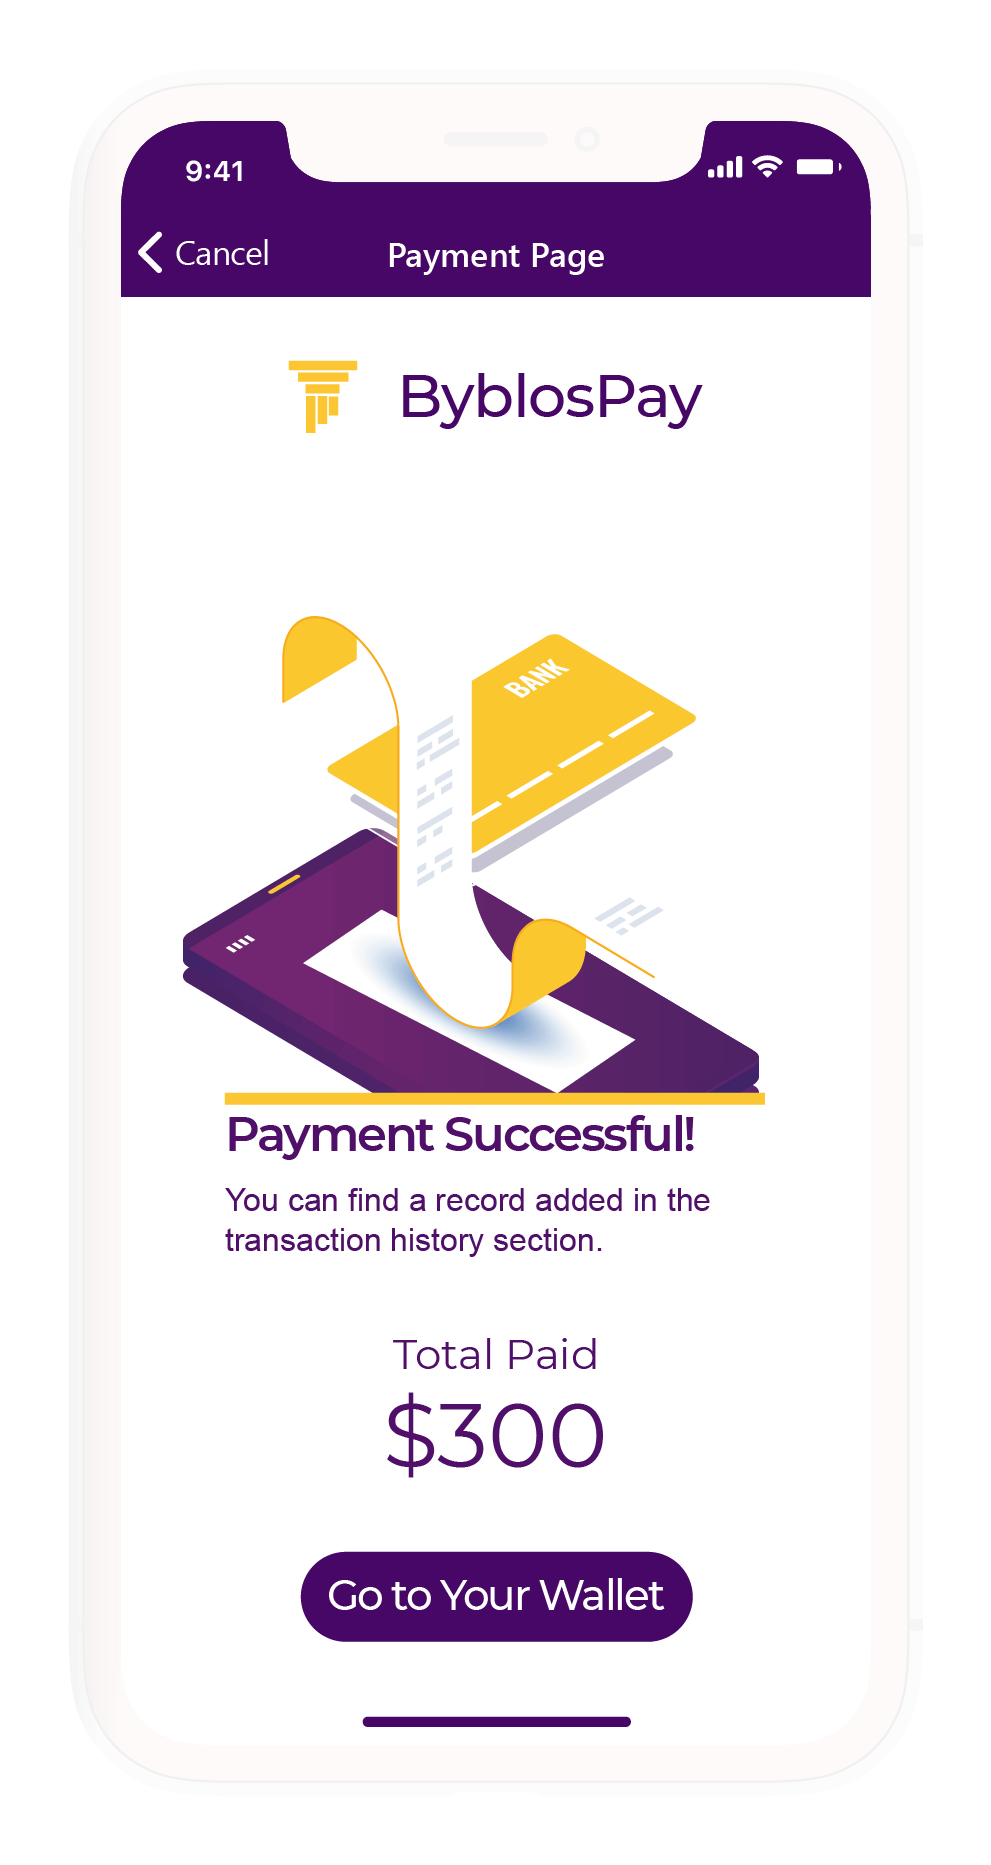 The UI design of the screen notifying the users that a payment was successful, clearly showing to the user exactly how much has been paid in the transaction process